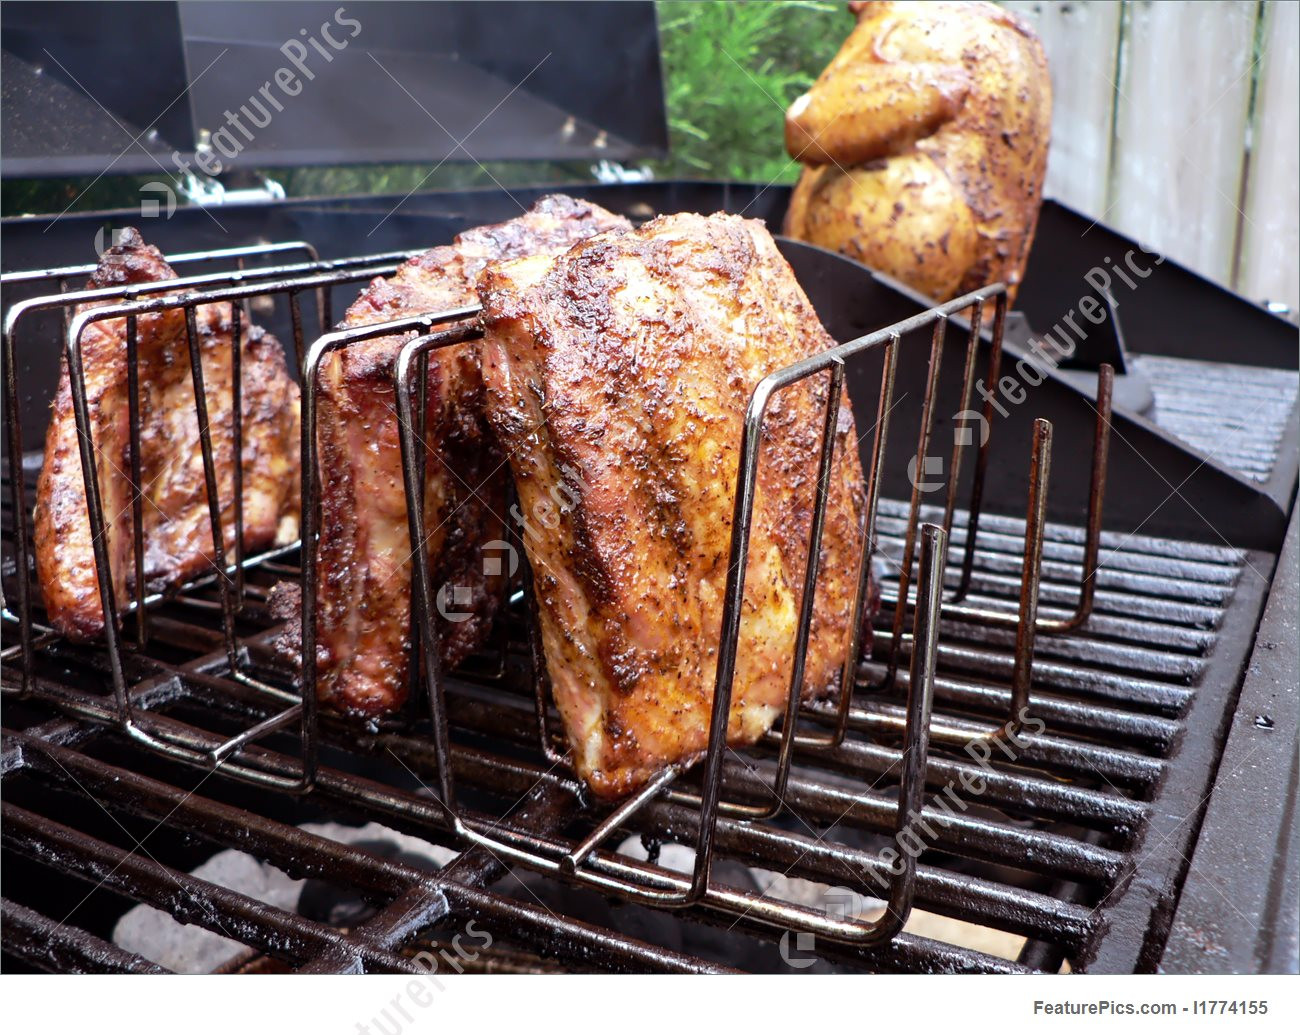 Pork Ribs On Gas Grill
 Meat Products Grilled Rack Pork Ribs The Grill